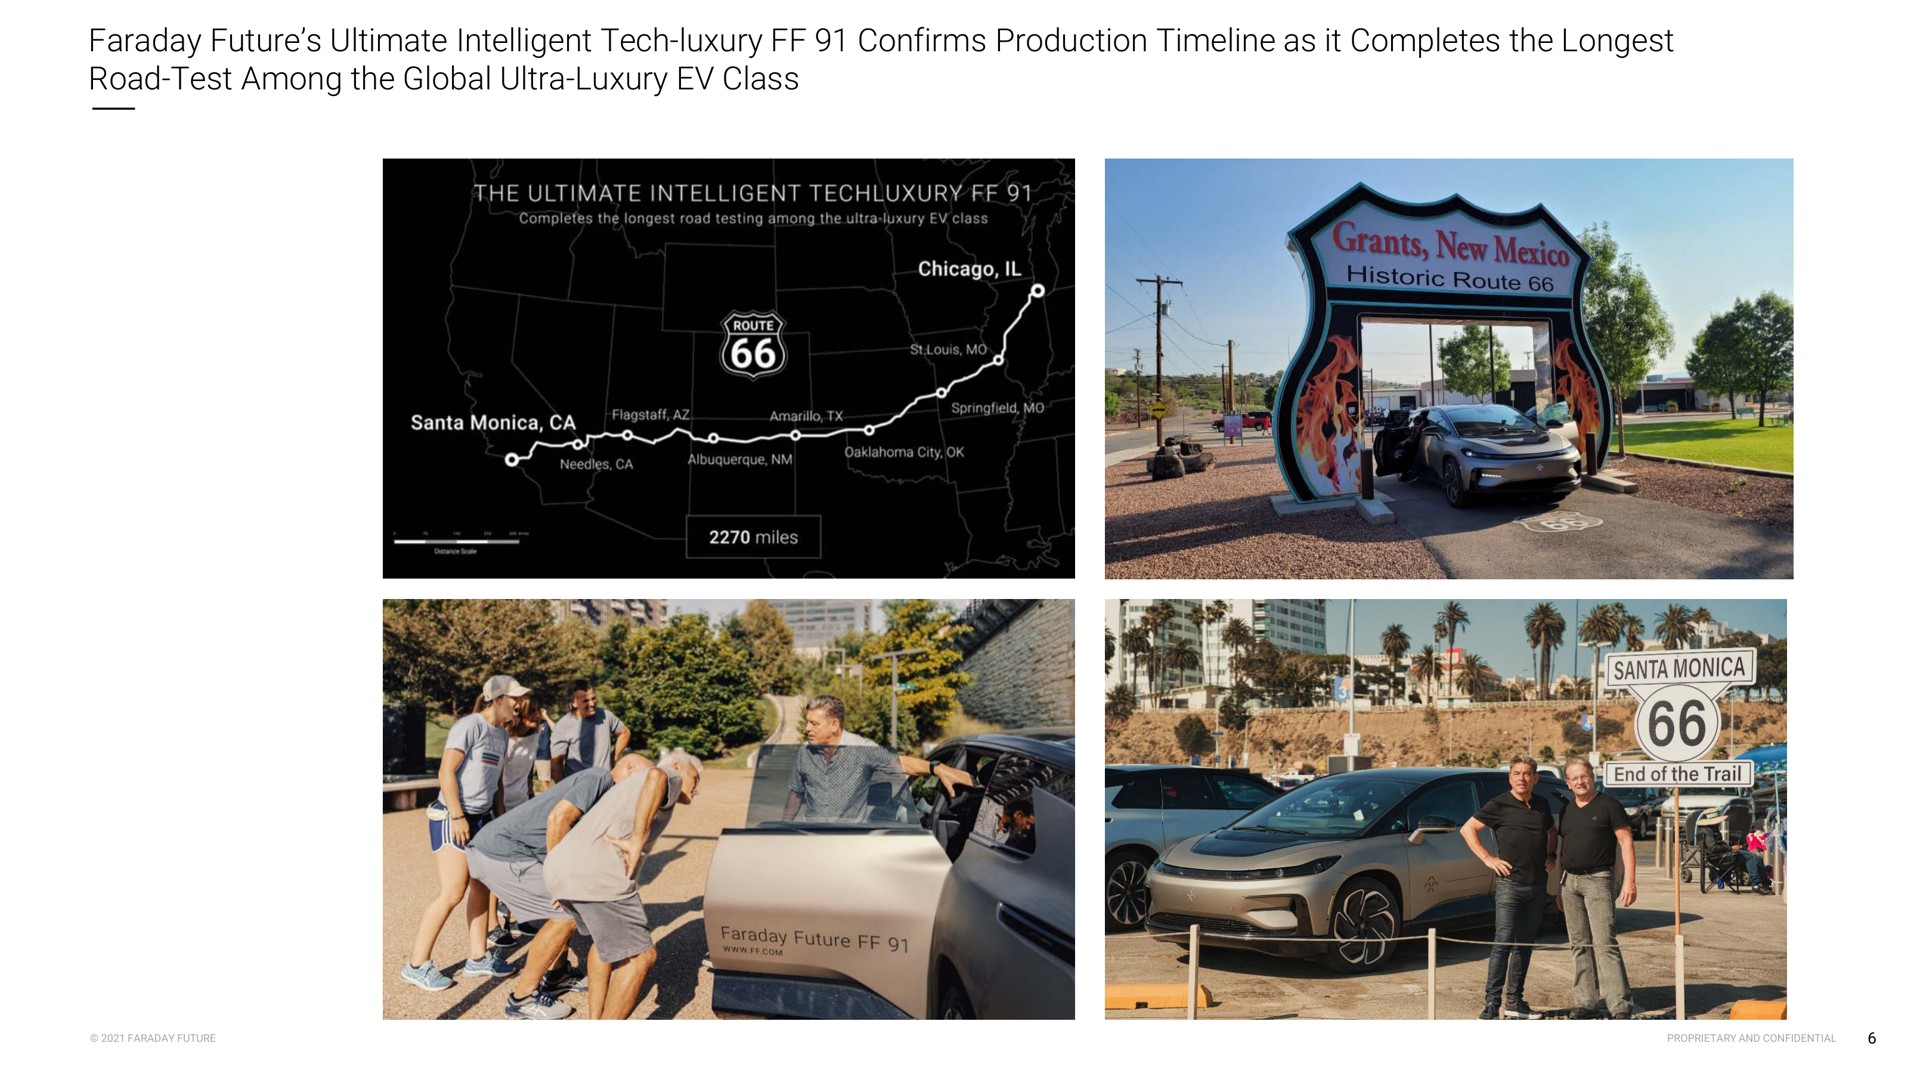 faraday future ultimate intelligent tech luxury confirms production as it completes the road test among the global ultra luxury class | Faraday Future